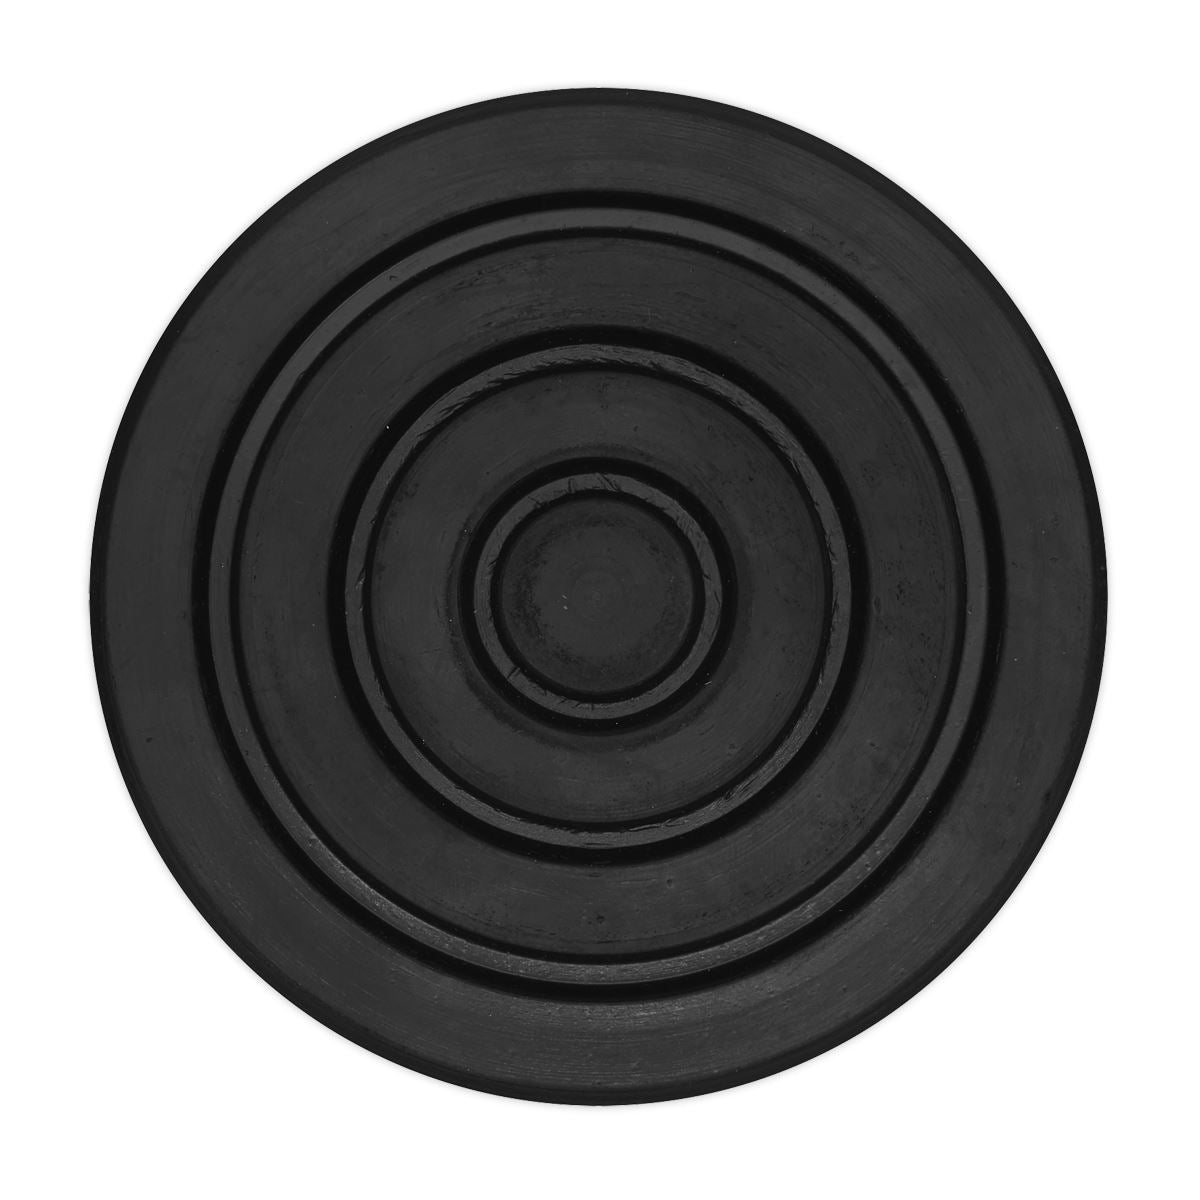 Sealey Safety Rubber Trolley Jack Pad Type A To Fit 116-123mm Saddle